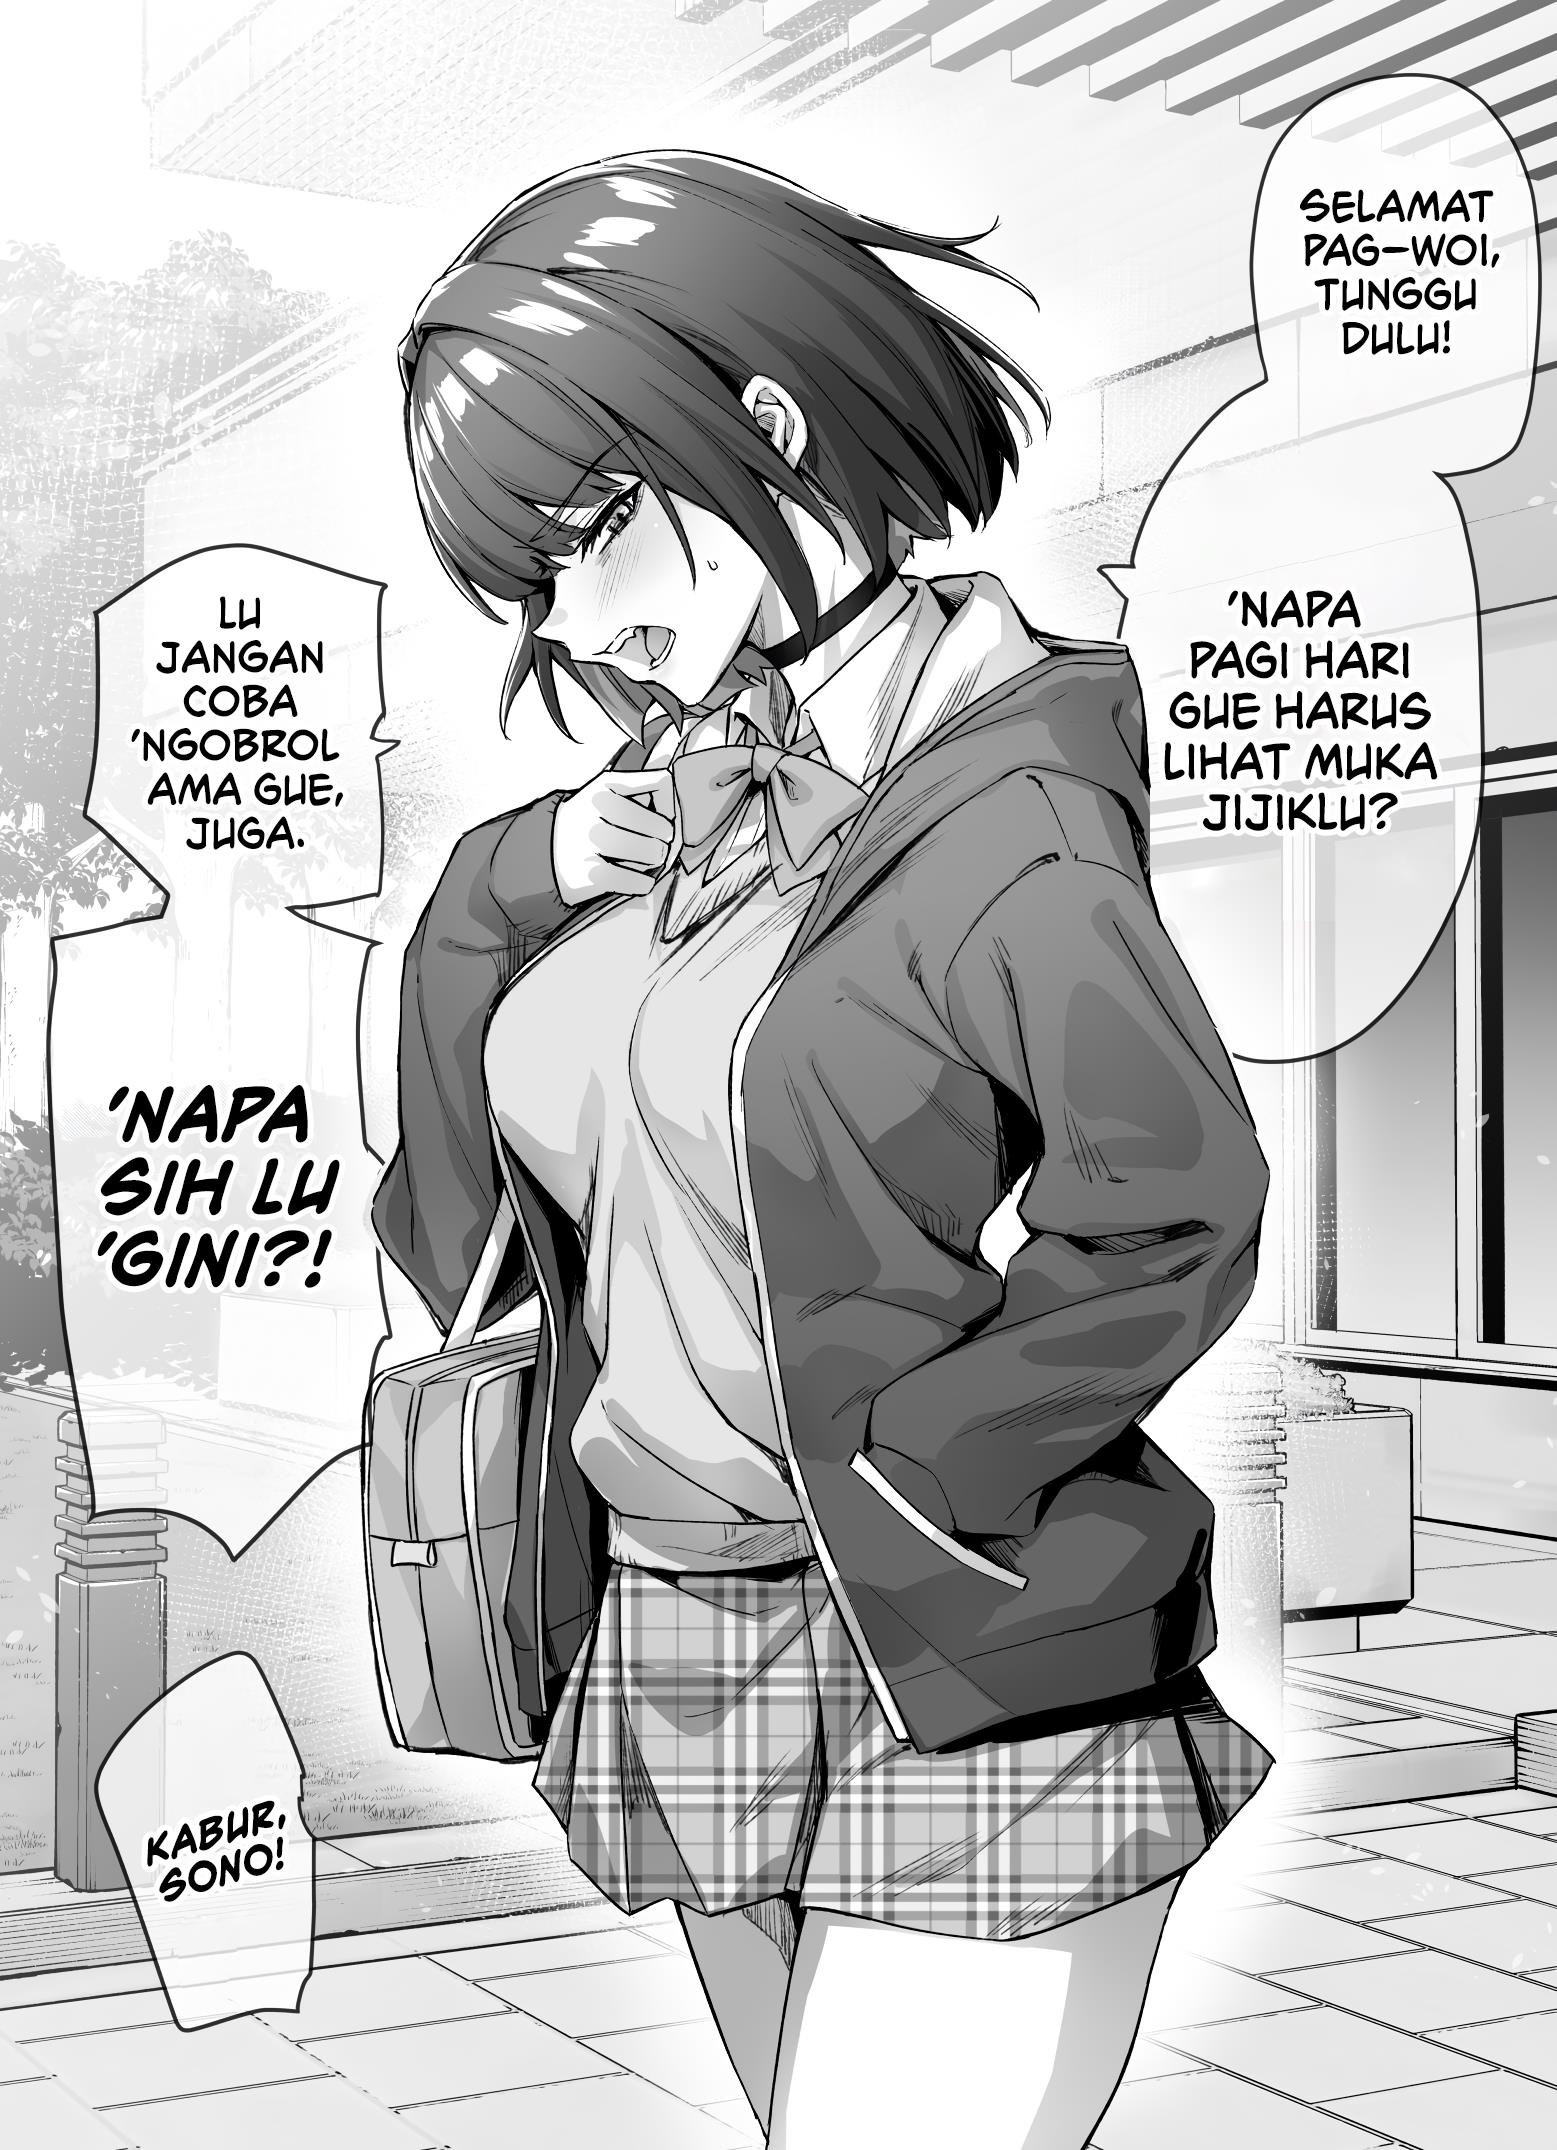 The Tsuntsuntsuntsuntsuntsun tsuntsuntsuntsuntsundere Girl Getting Less and Less Tsun Day by Day Chapter 7.2